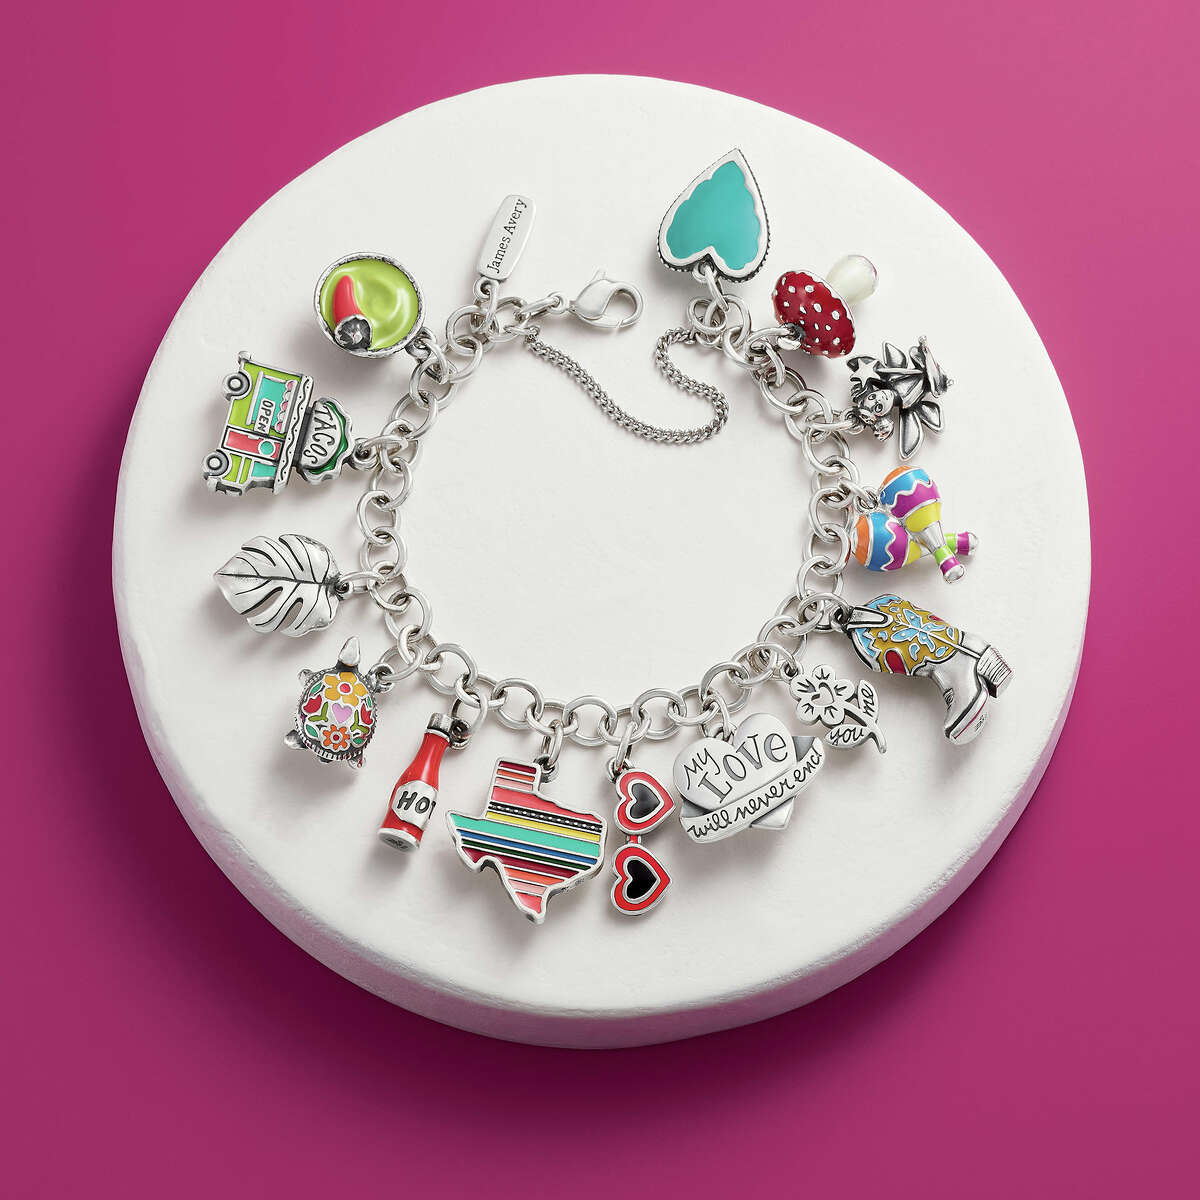 James Avery Charm Bracelet Filled With Custom Charms